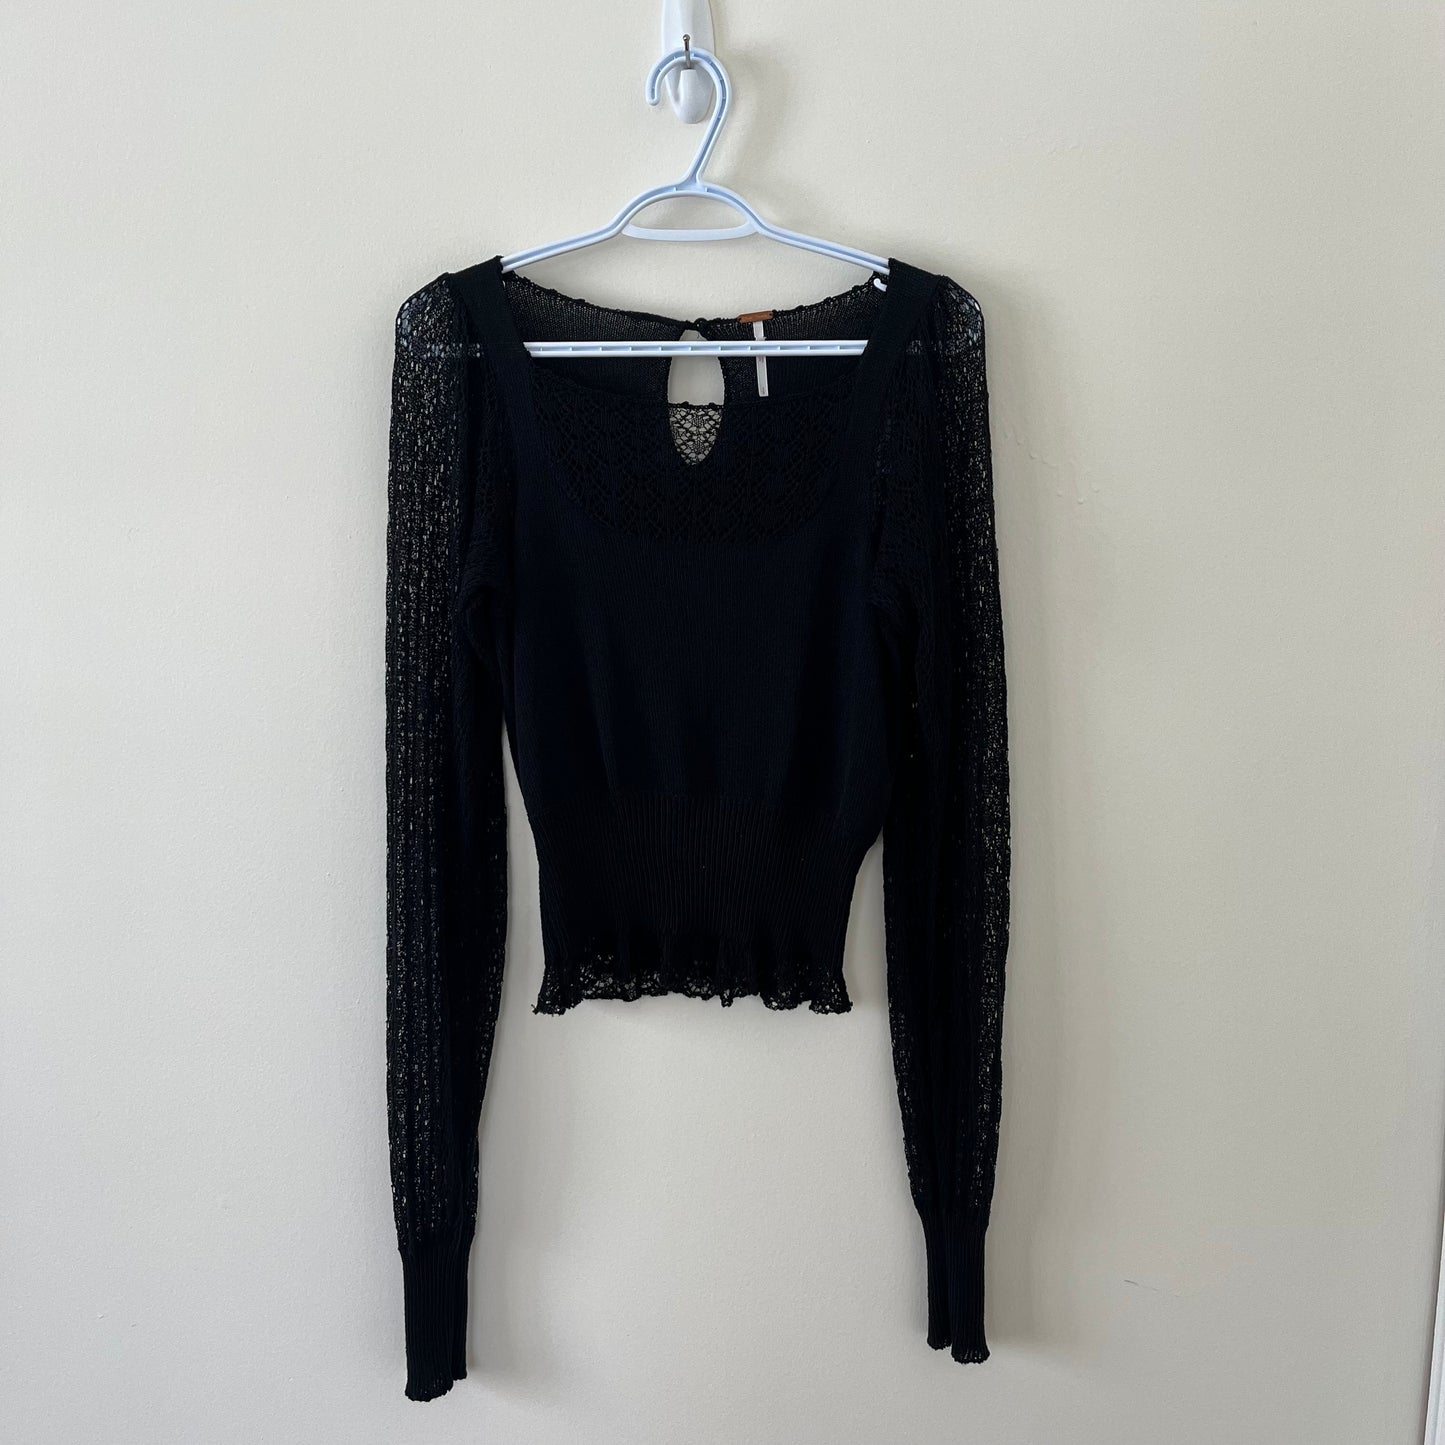 Free People Lacy Black Knit Top (S)